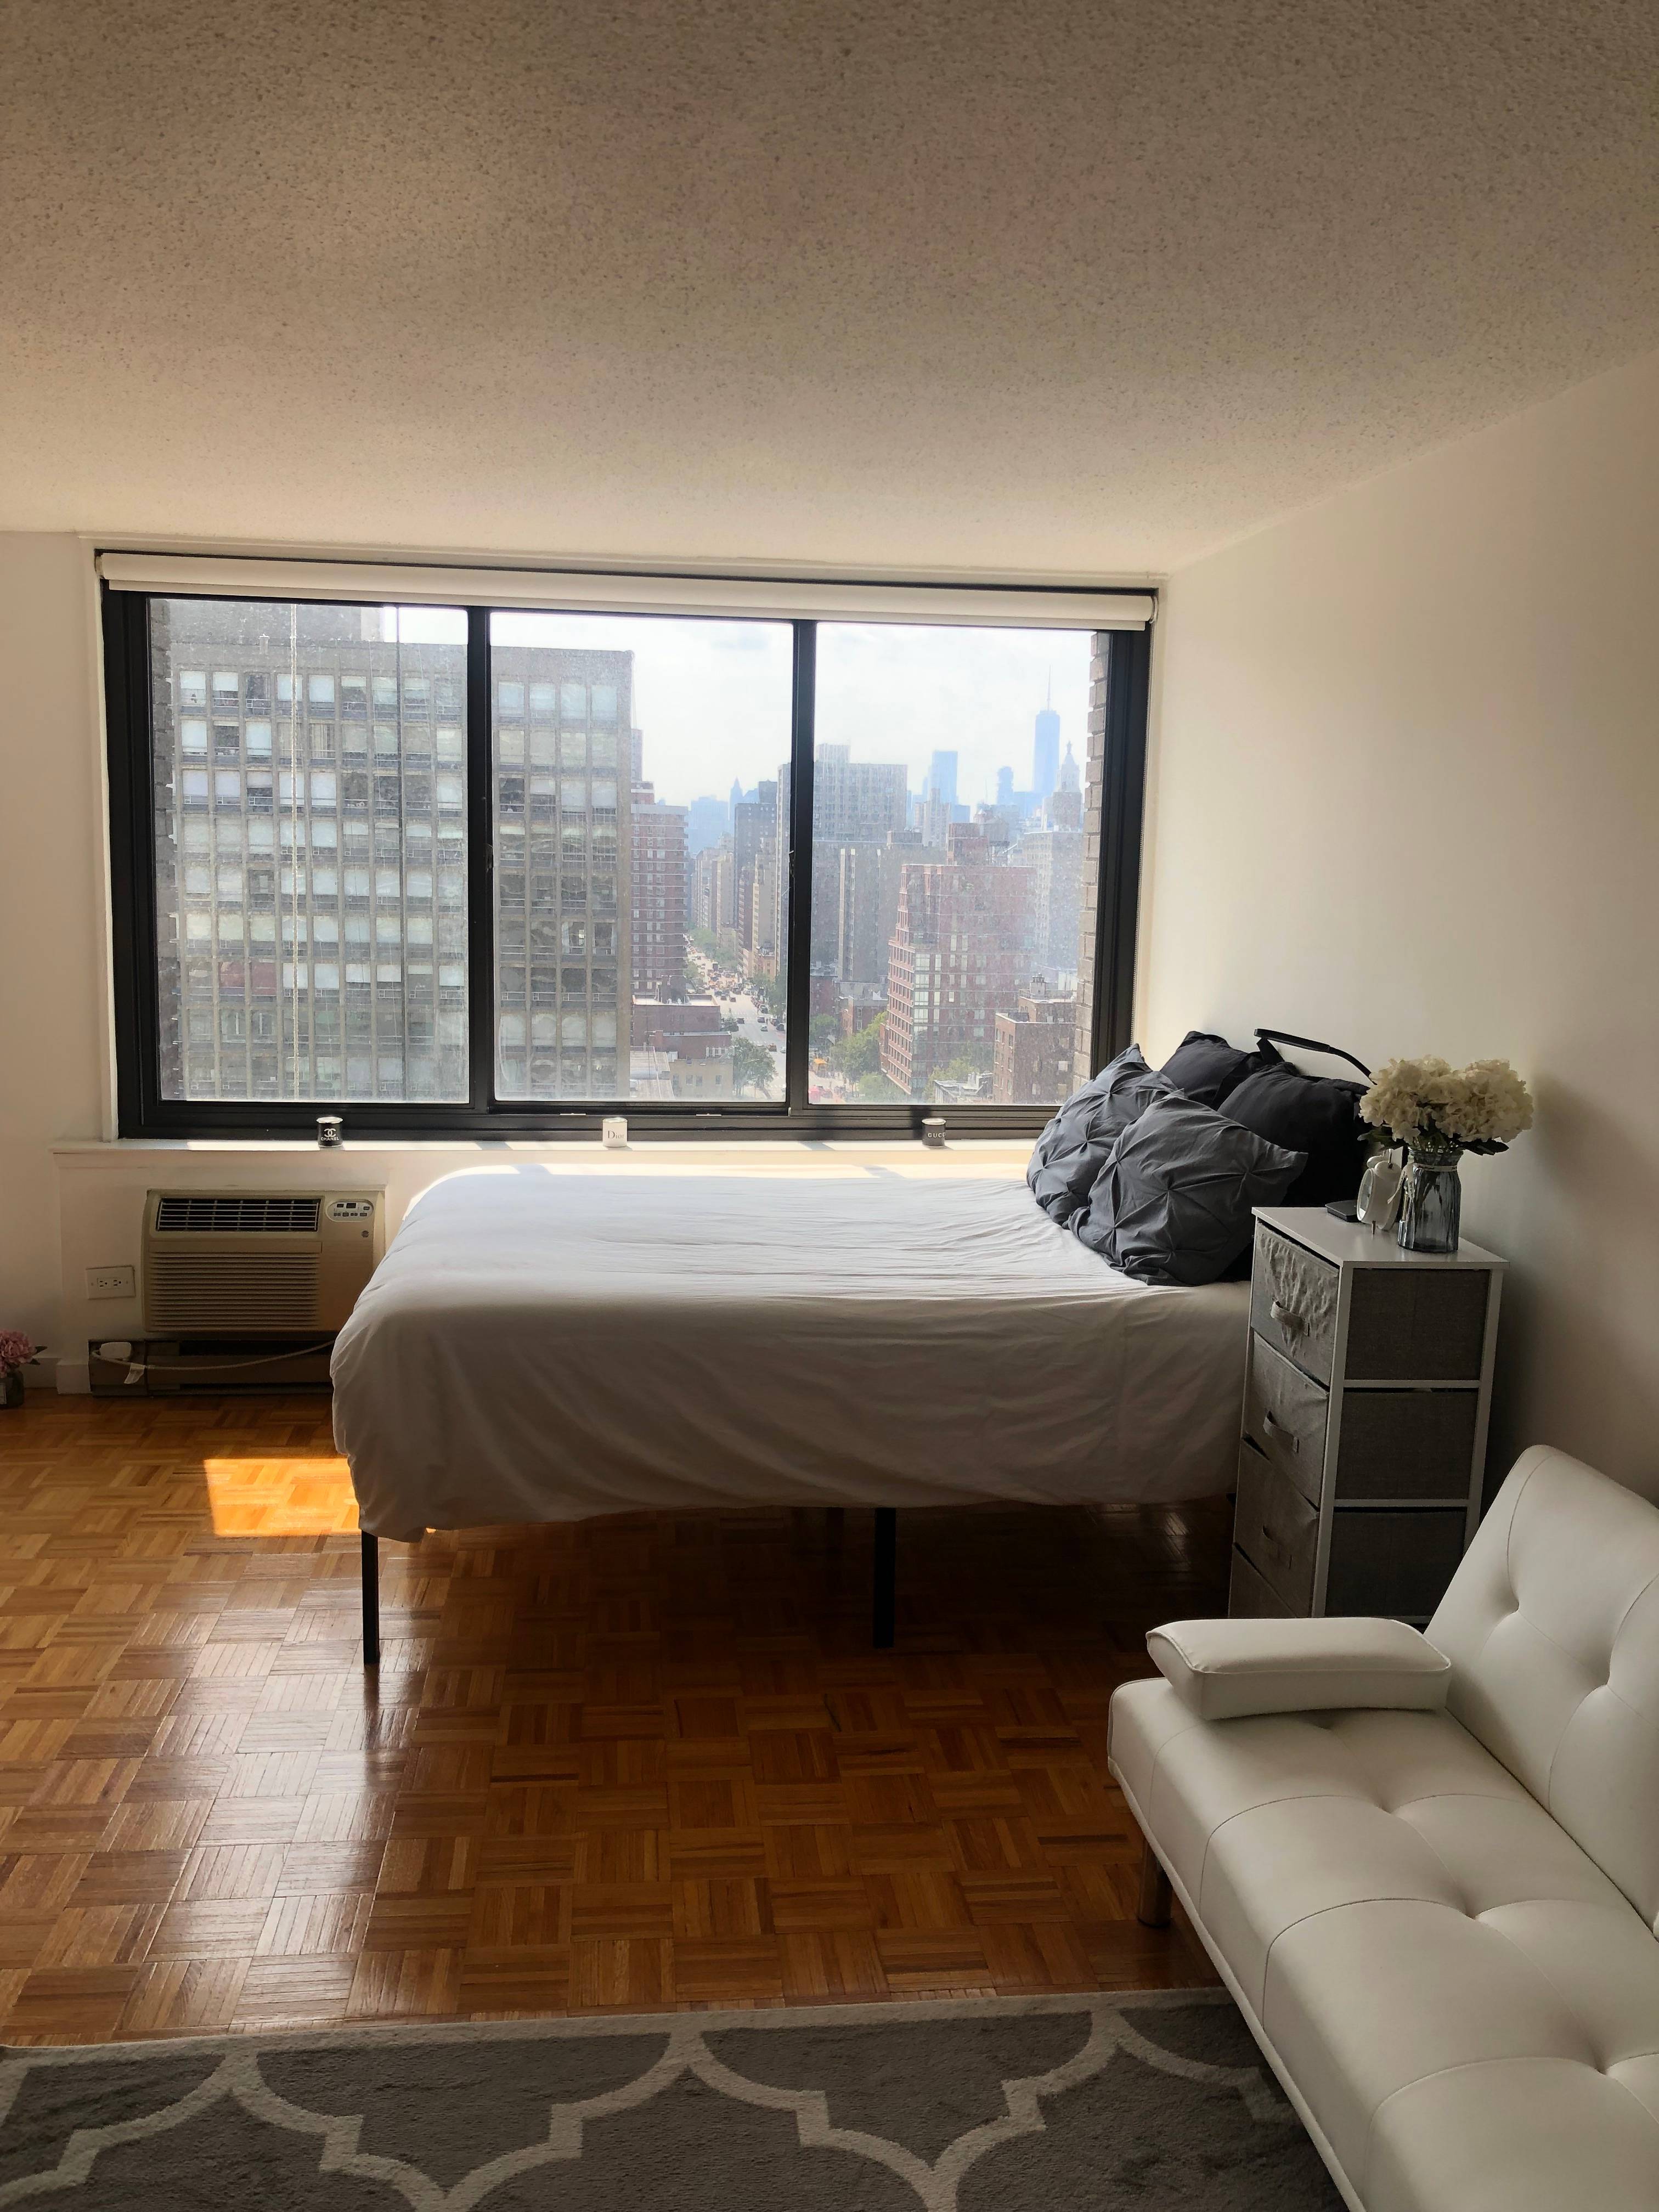 Short Term Rental- Large Furnished Studio in Midtown- Amazing Location and Views